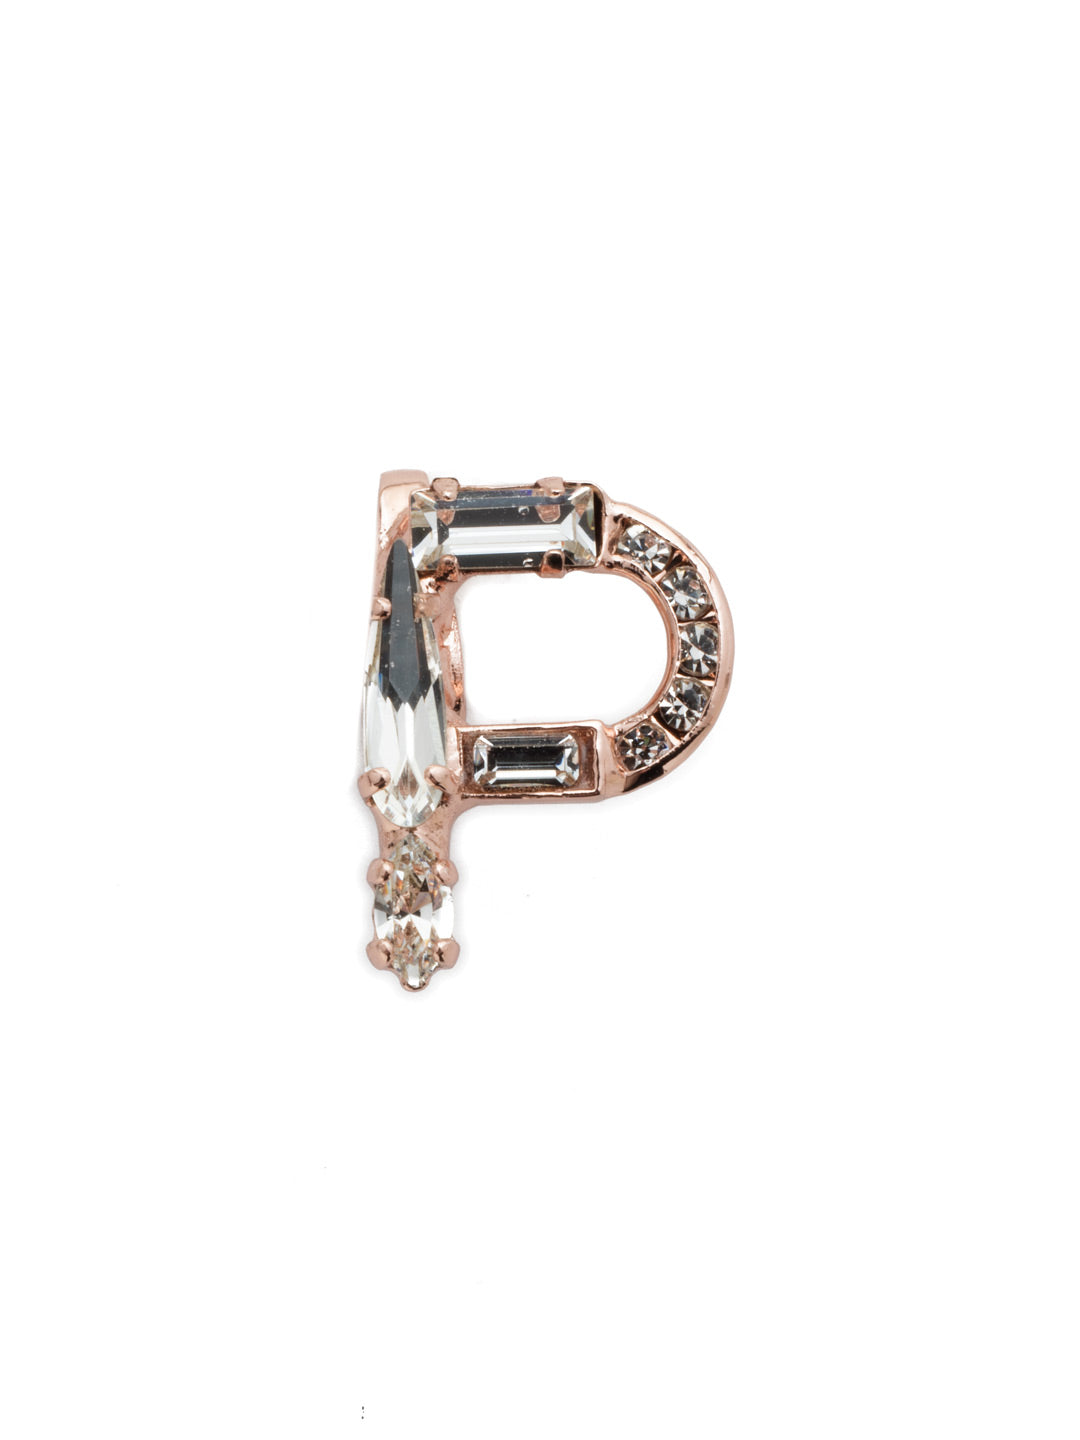 Crystal Charm 'P' Charm Other Accessory - CES21RGCRY